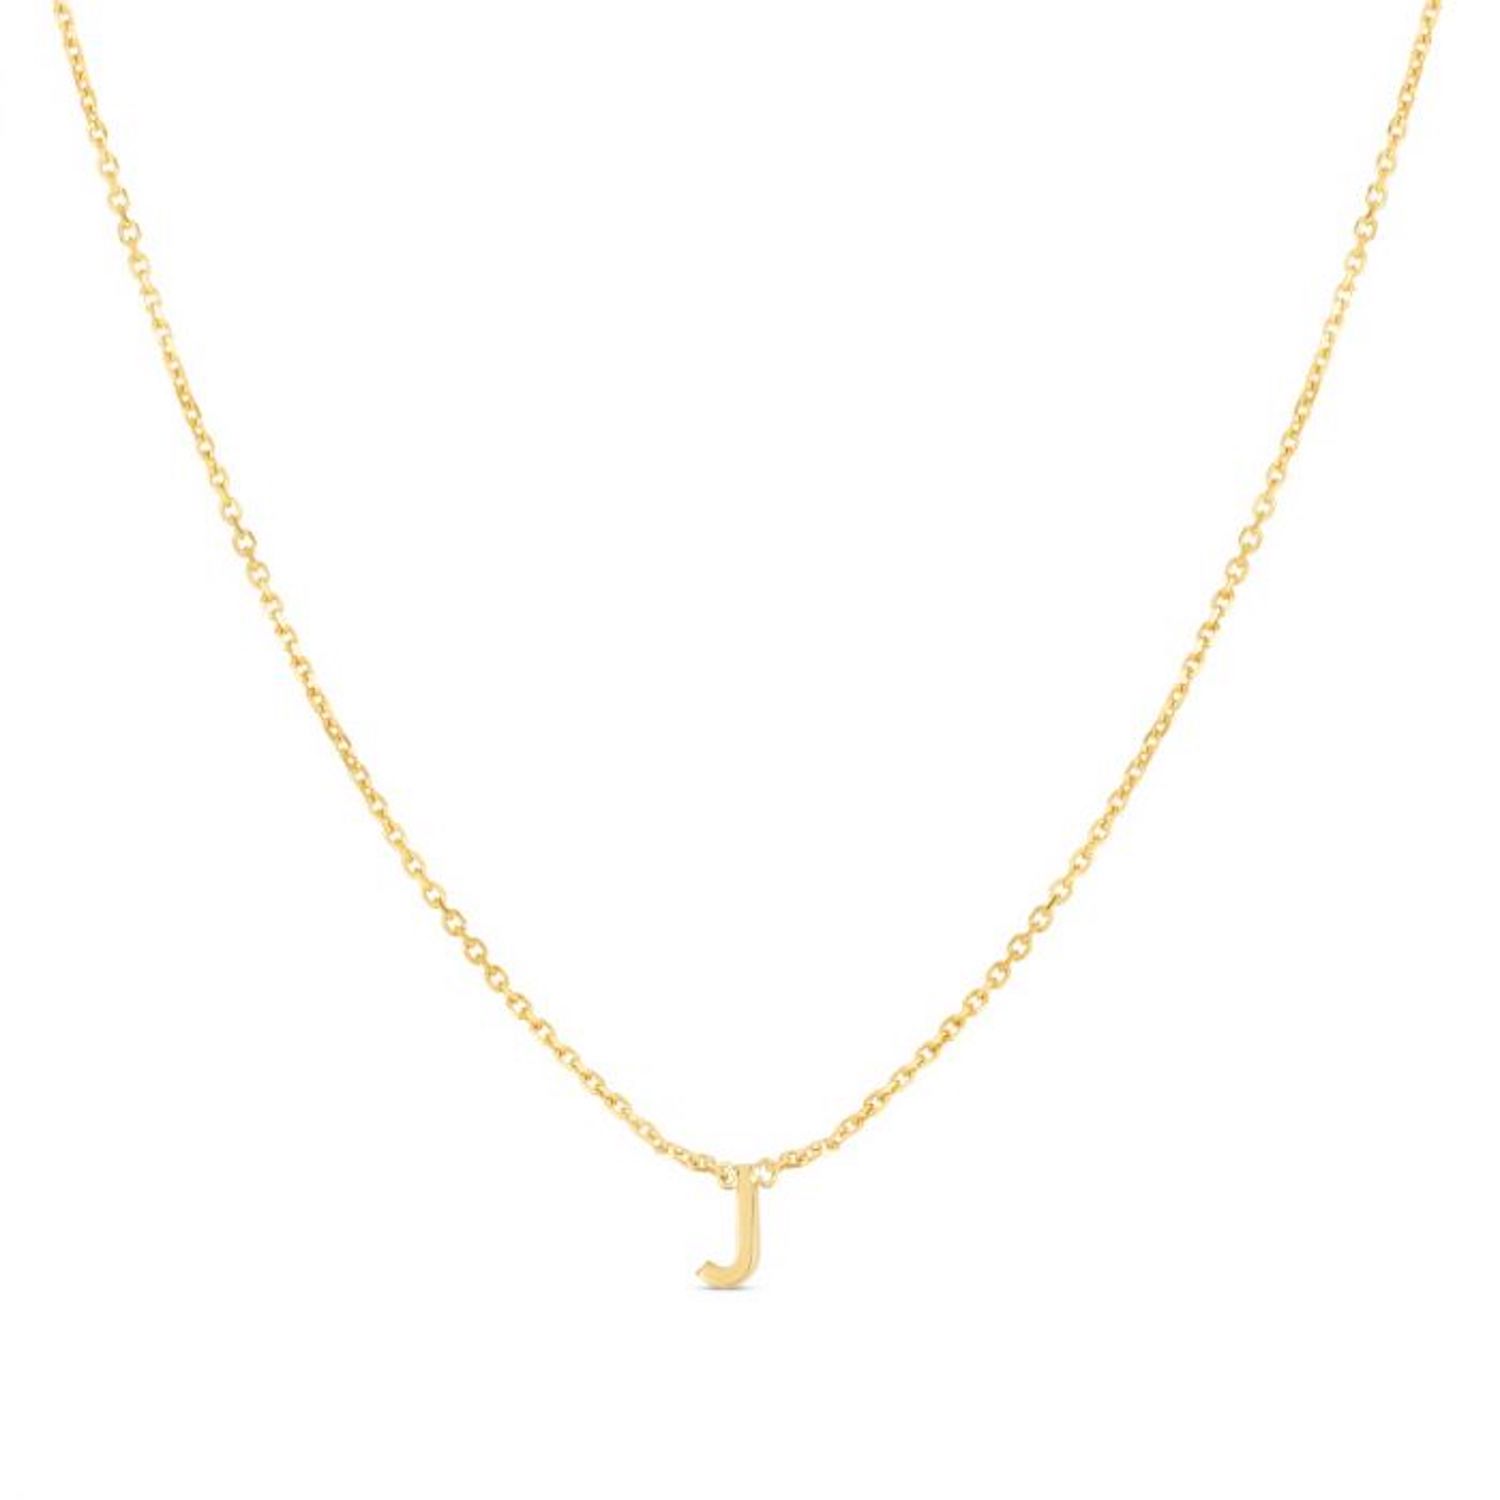 14K Yellow Gold Letter Initials Pendant Necklace 16"-18" - J